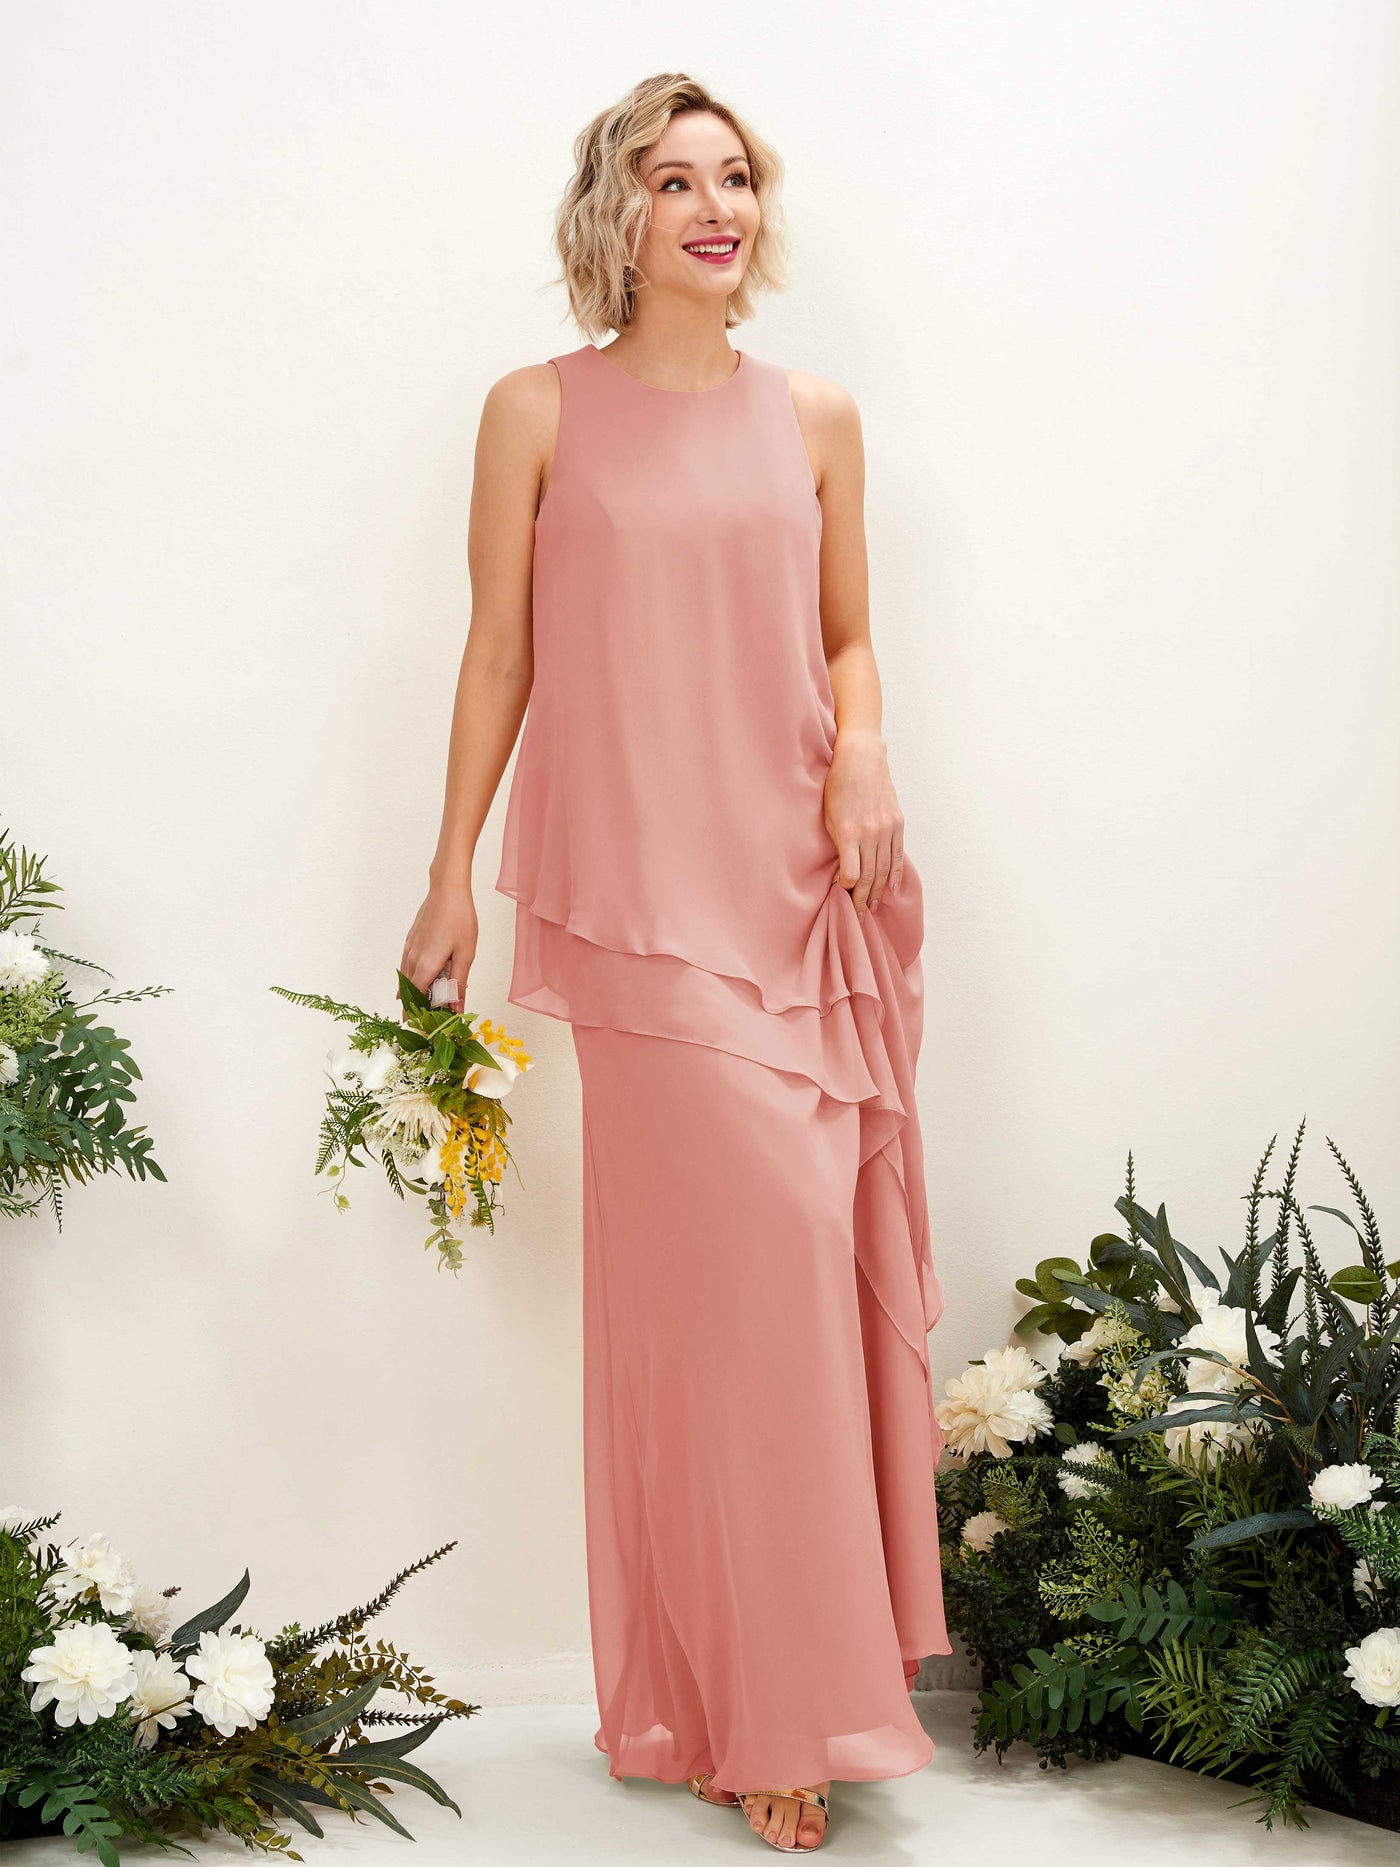 Champagne Rose Bridesmaid Dresses Bridesmaid Dress Maternity Chiffon Round Full Length Sleeveless Wedding Party Dress (81222306)#color_champagne-rose